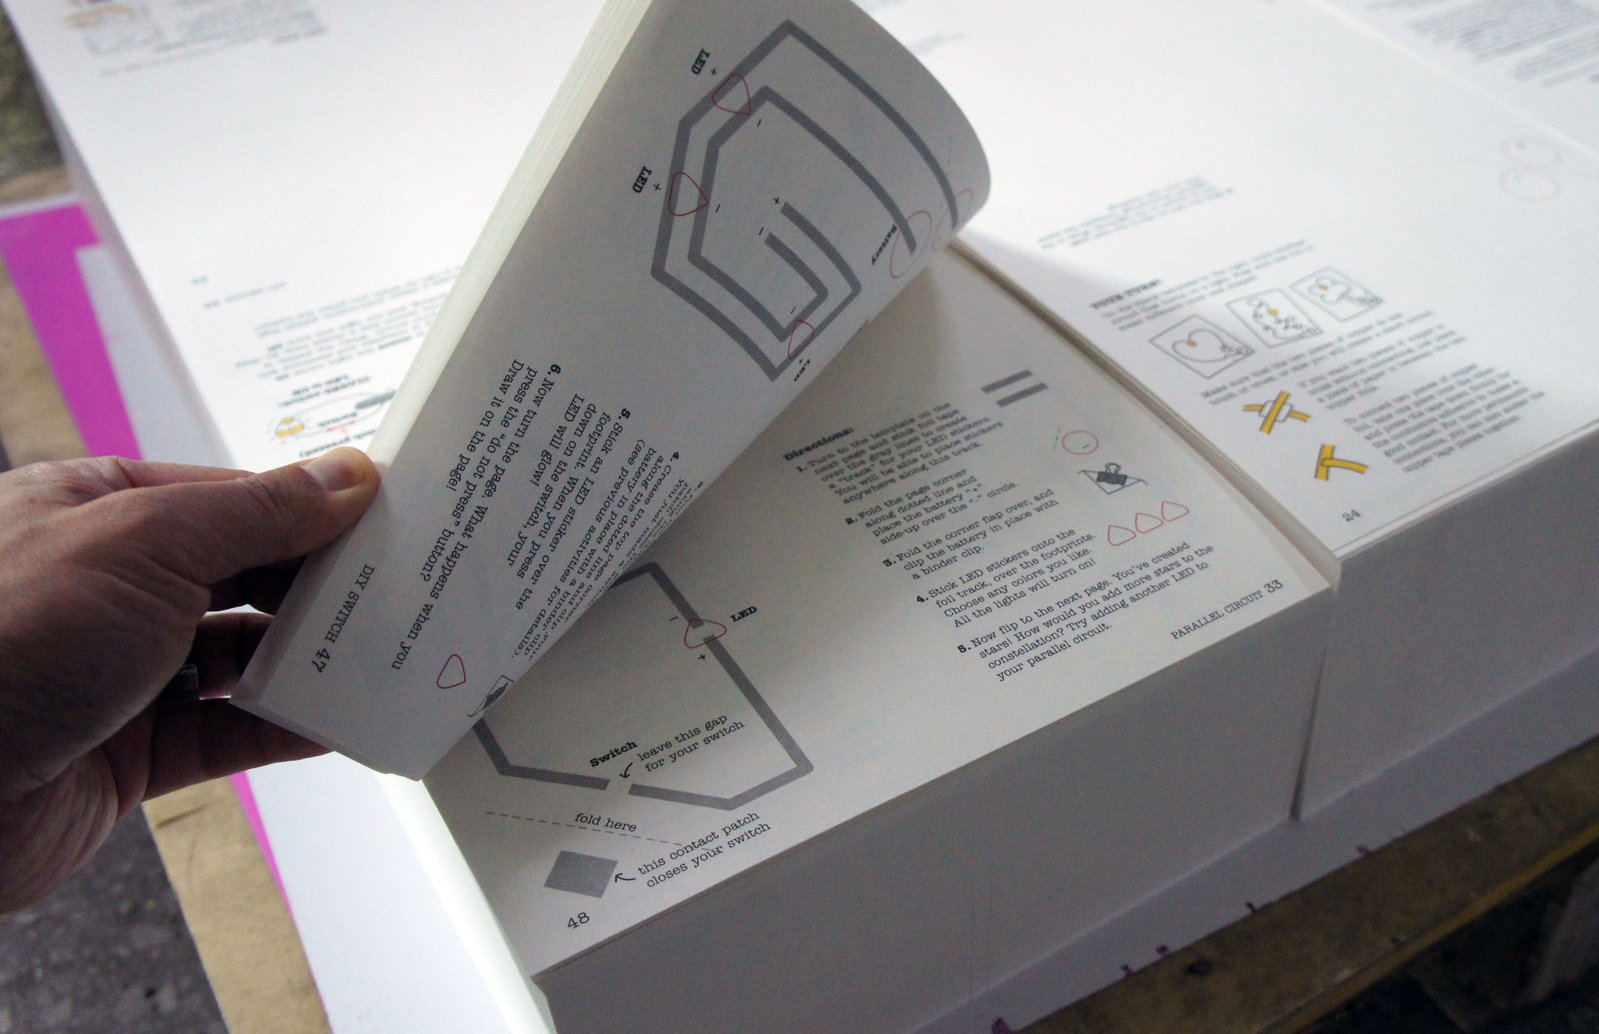 Chibitronics’ Circuit Sticker Sketchbook is also printed at this factory